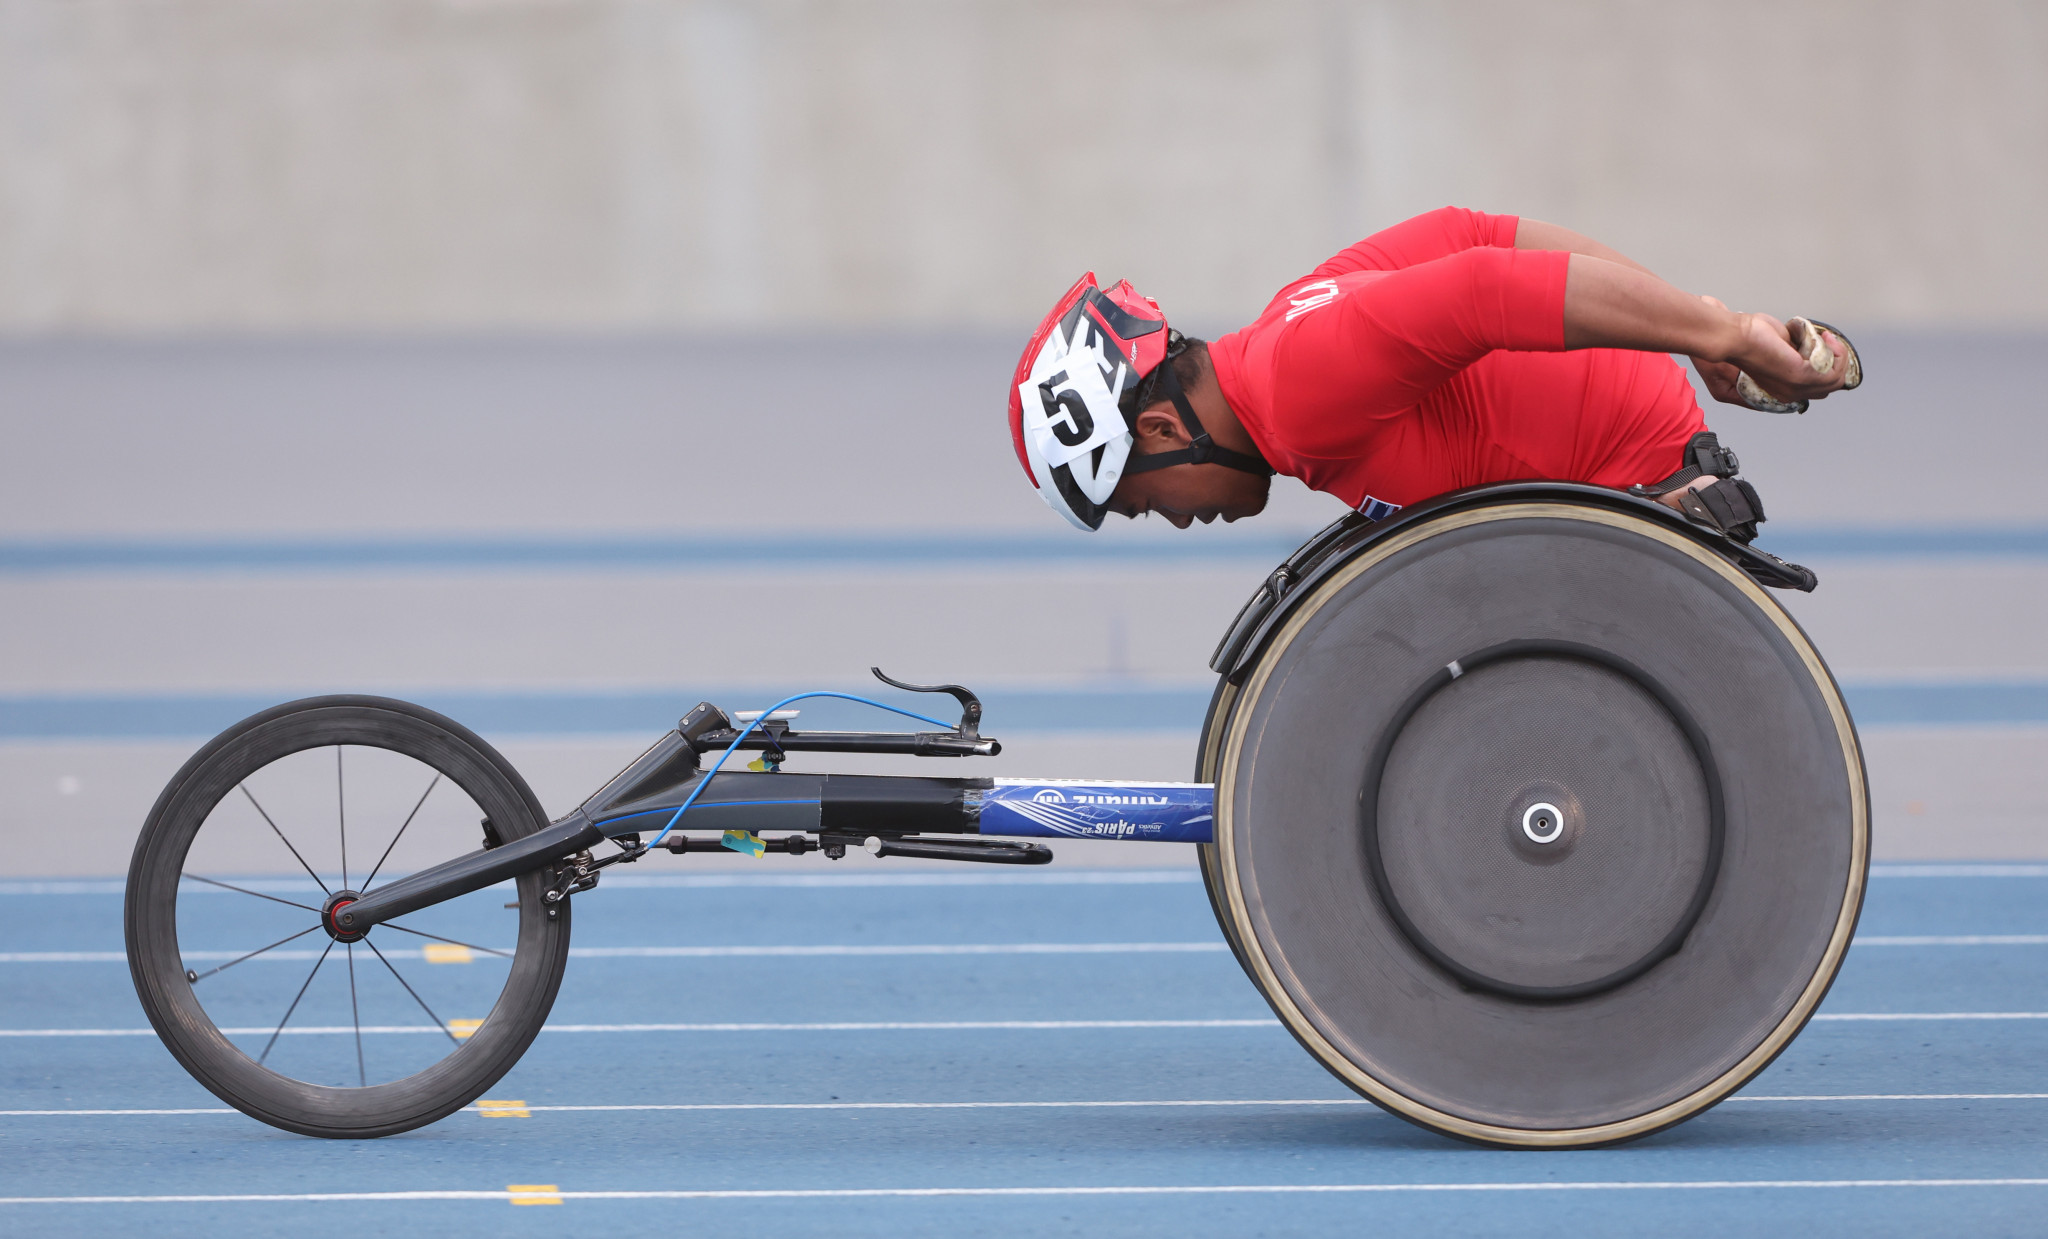 Pongsakorn Paeyo of Thailand beat his own men's T53 400m world record for gold in Paris ©Getty Images